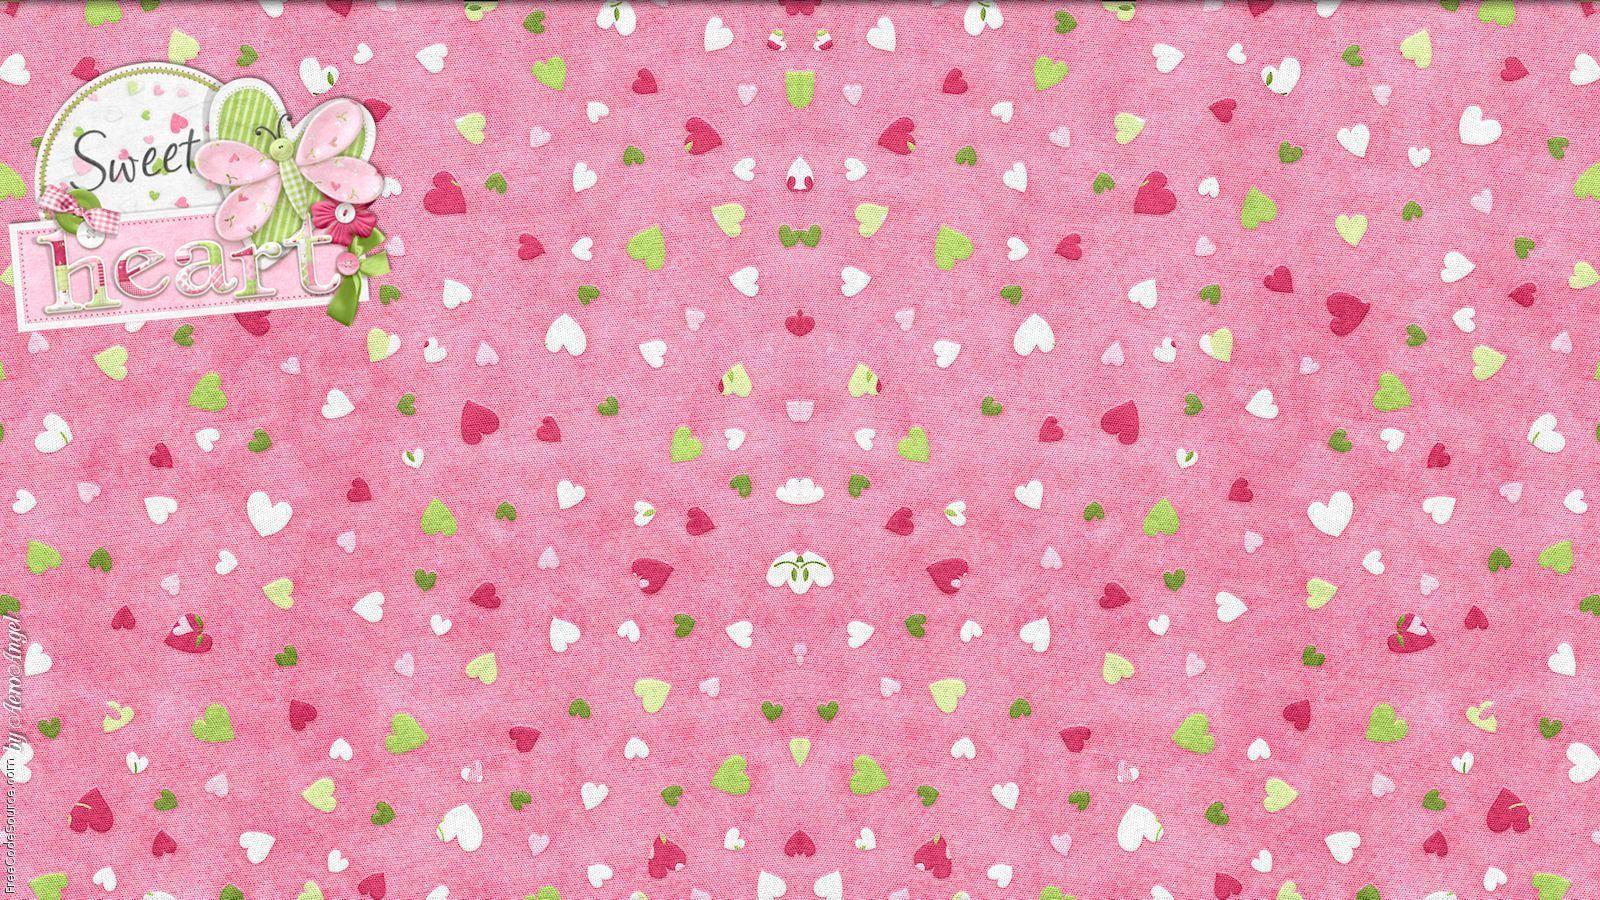 Sweet Heart Formspring Background, Sweet Heart Formspring Layouts